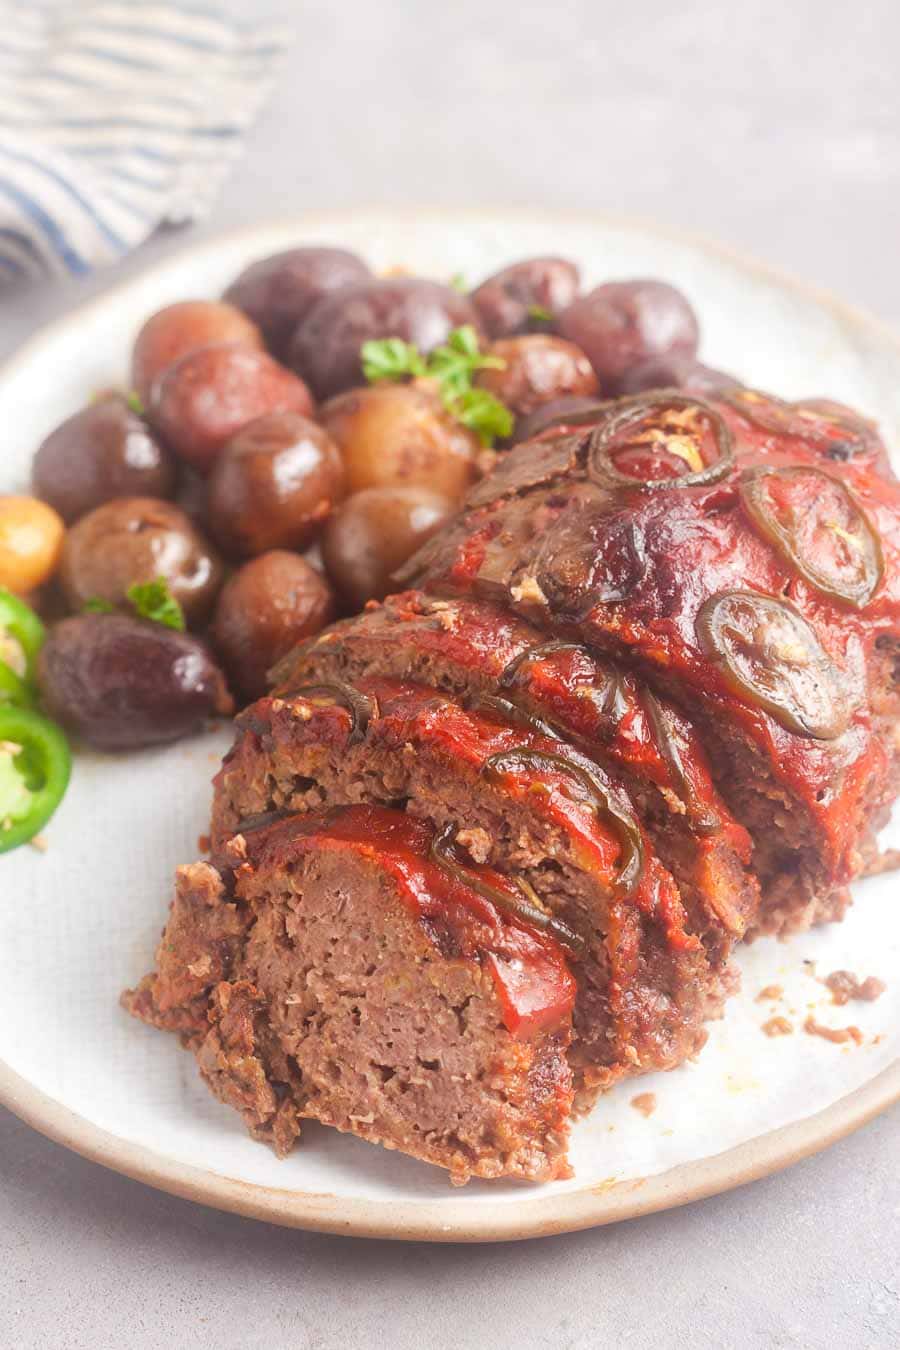 a partially sliced crockpot meatloaf on a serving plate, with potatoes in the background